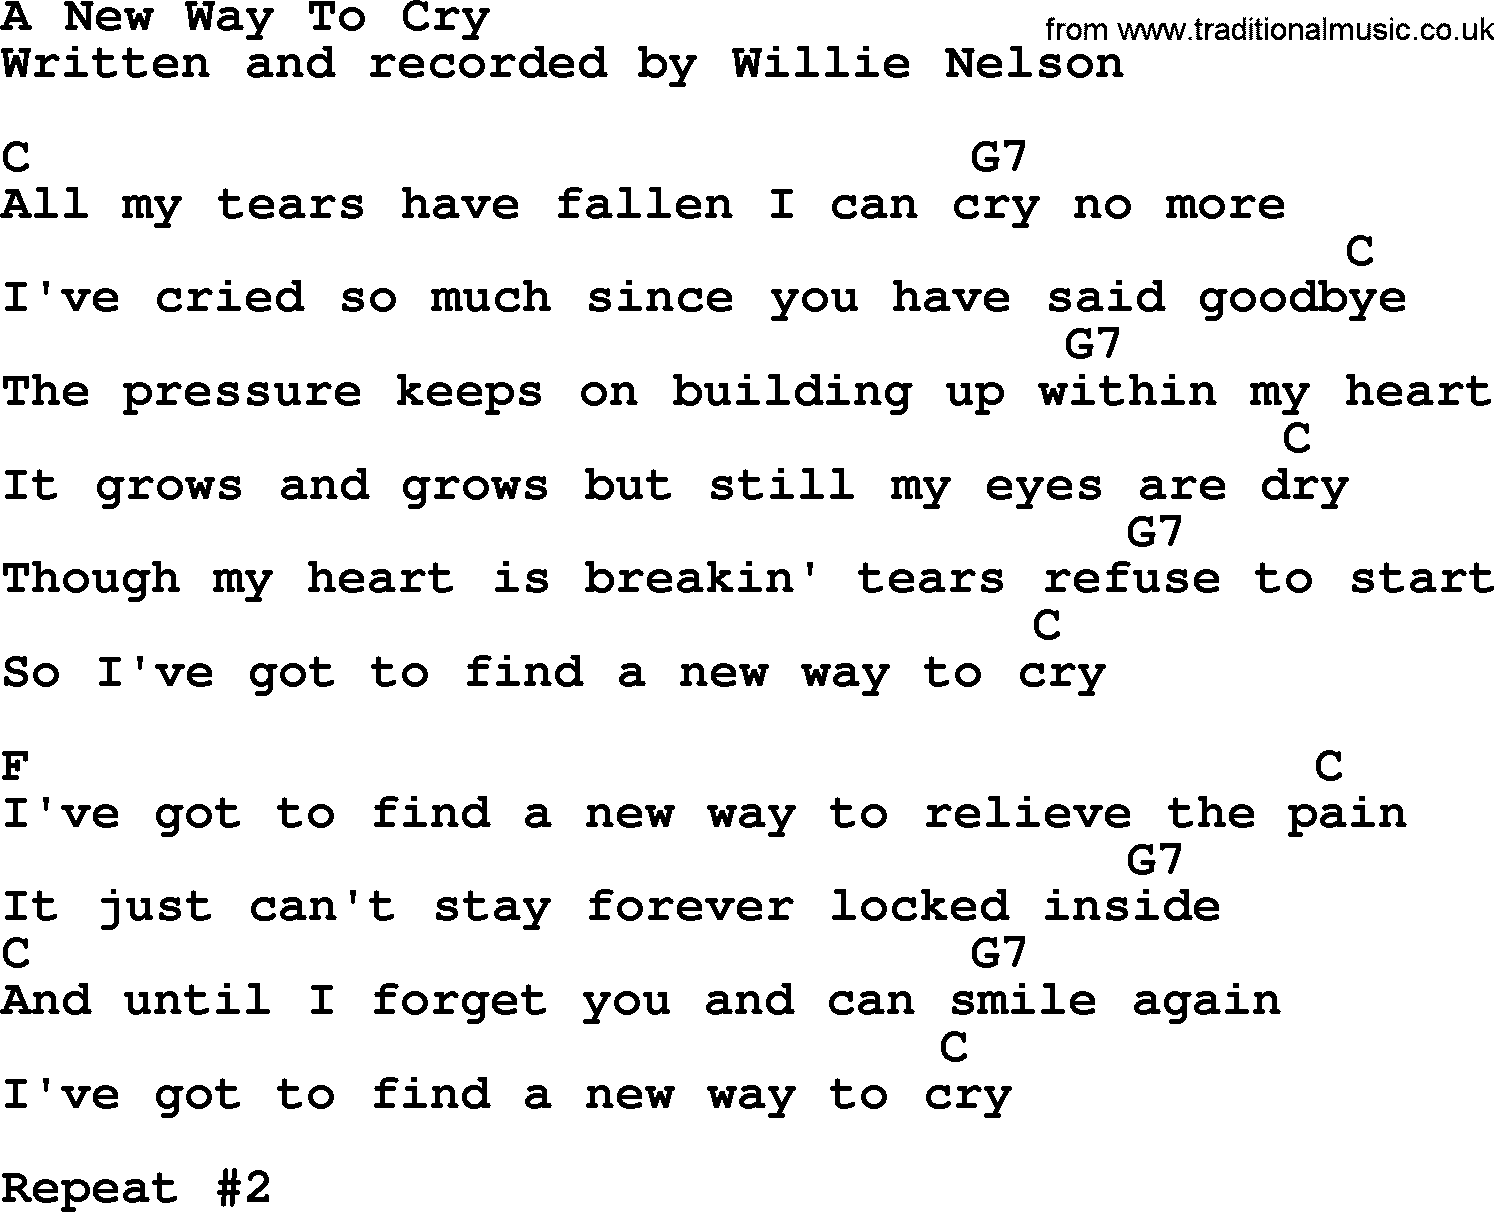 Willie Nelson song: A New Way To Cry, lyrics and chords